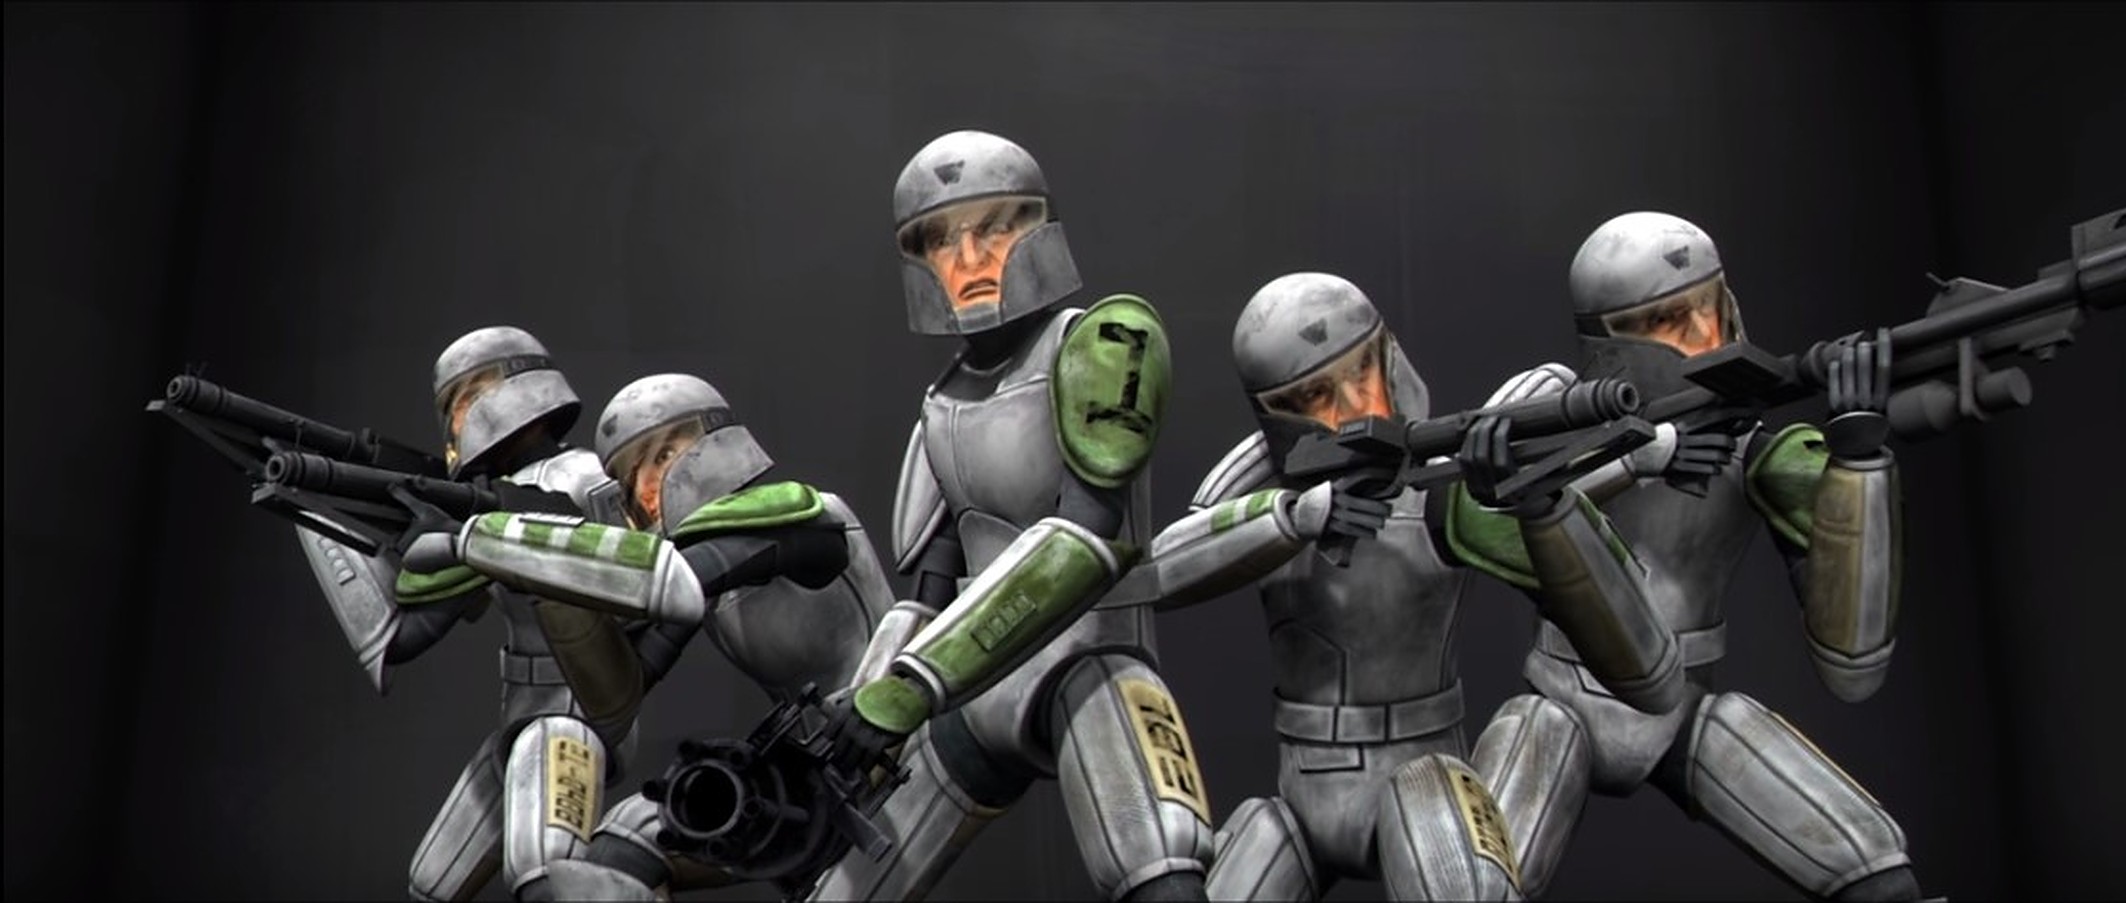 The Domino Squad from Star Wars: The Clone Wars preparing for a battle simulation.